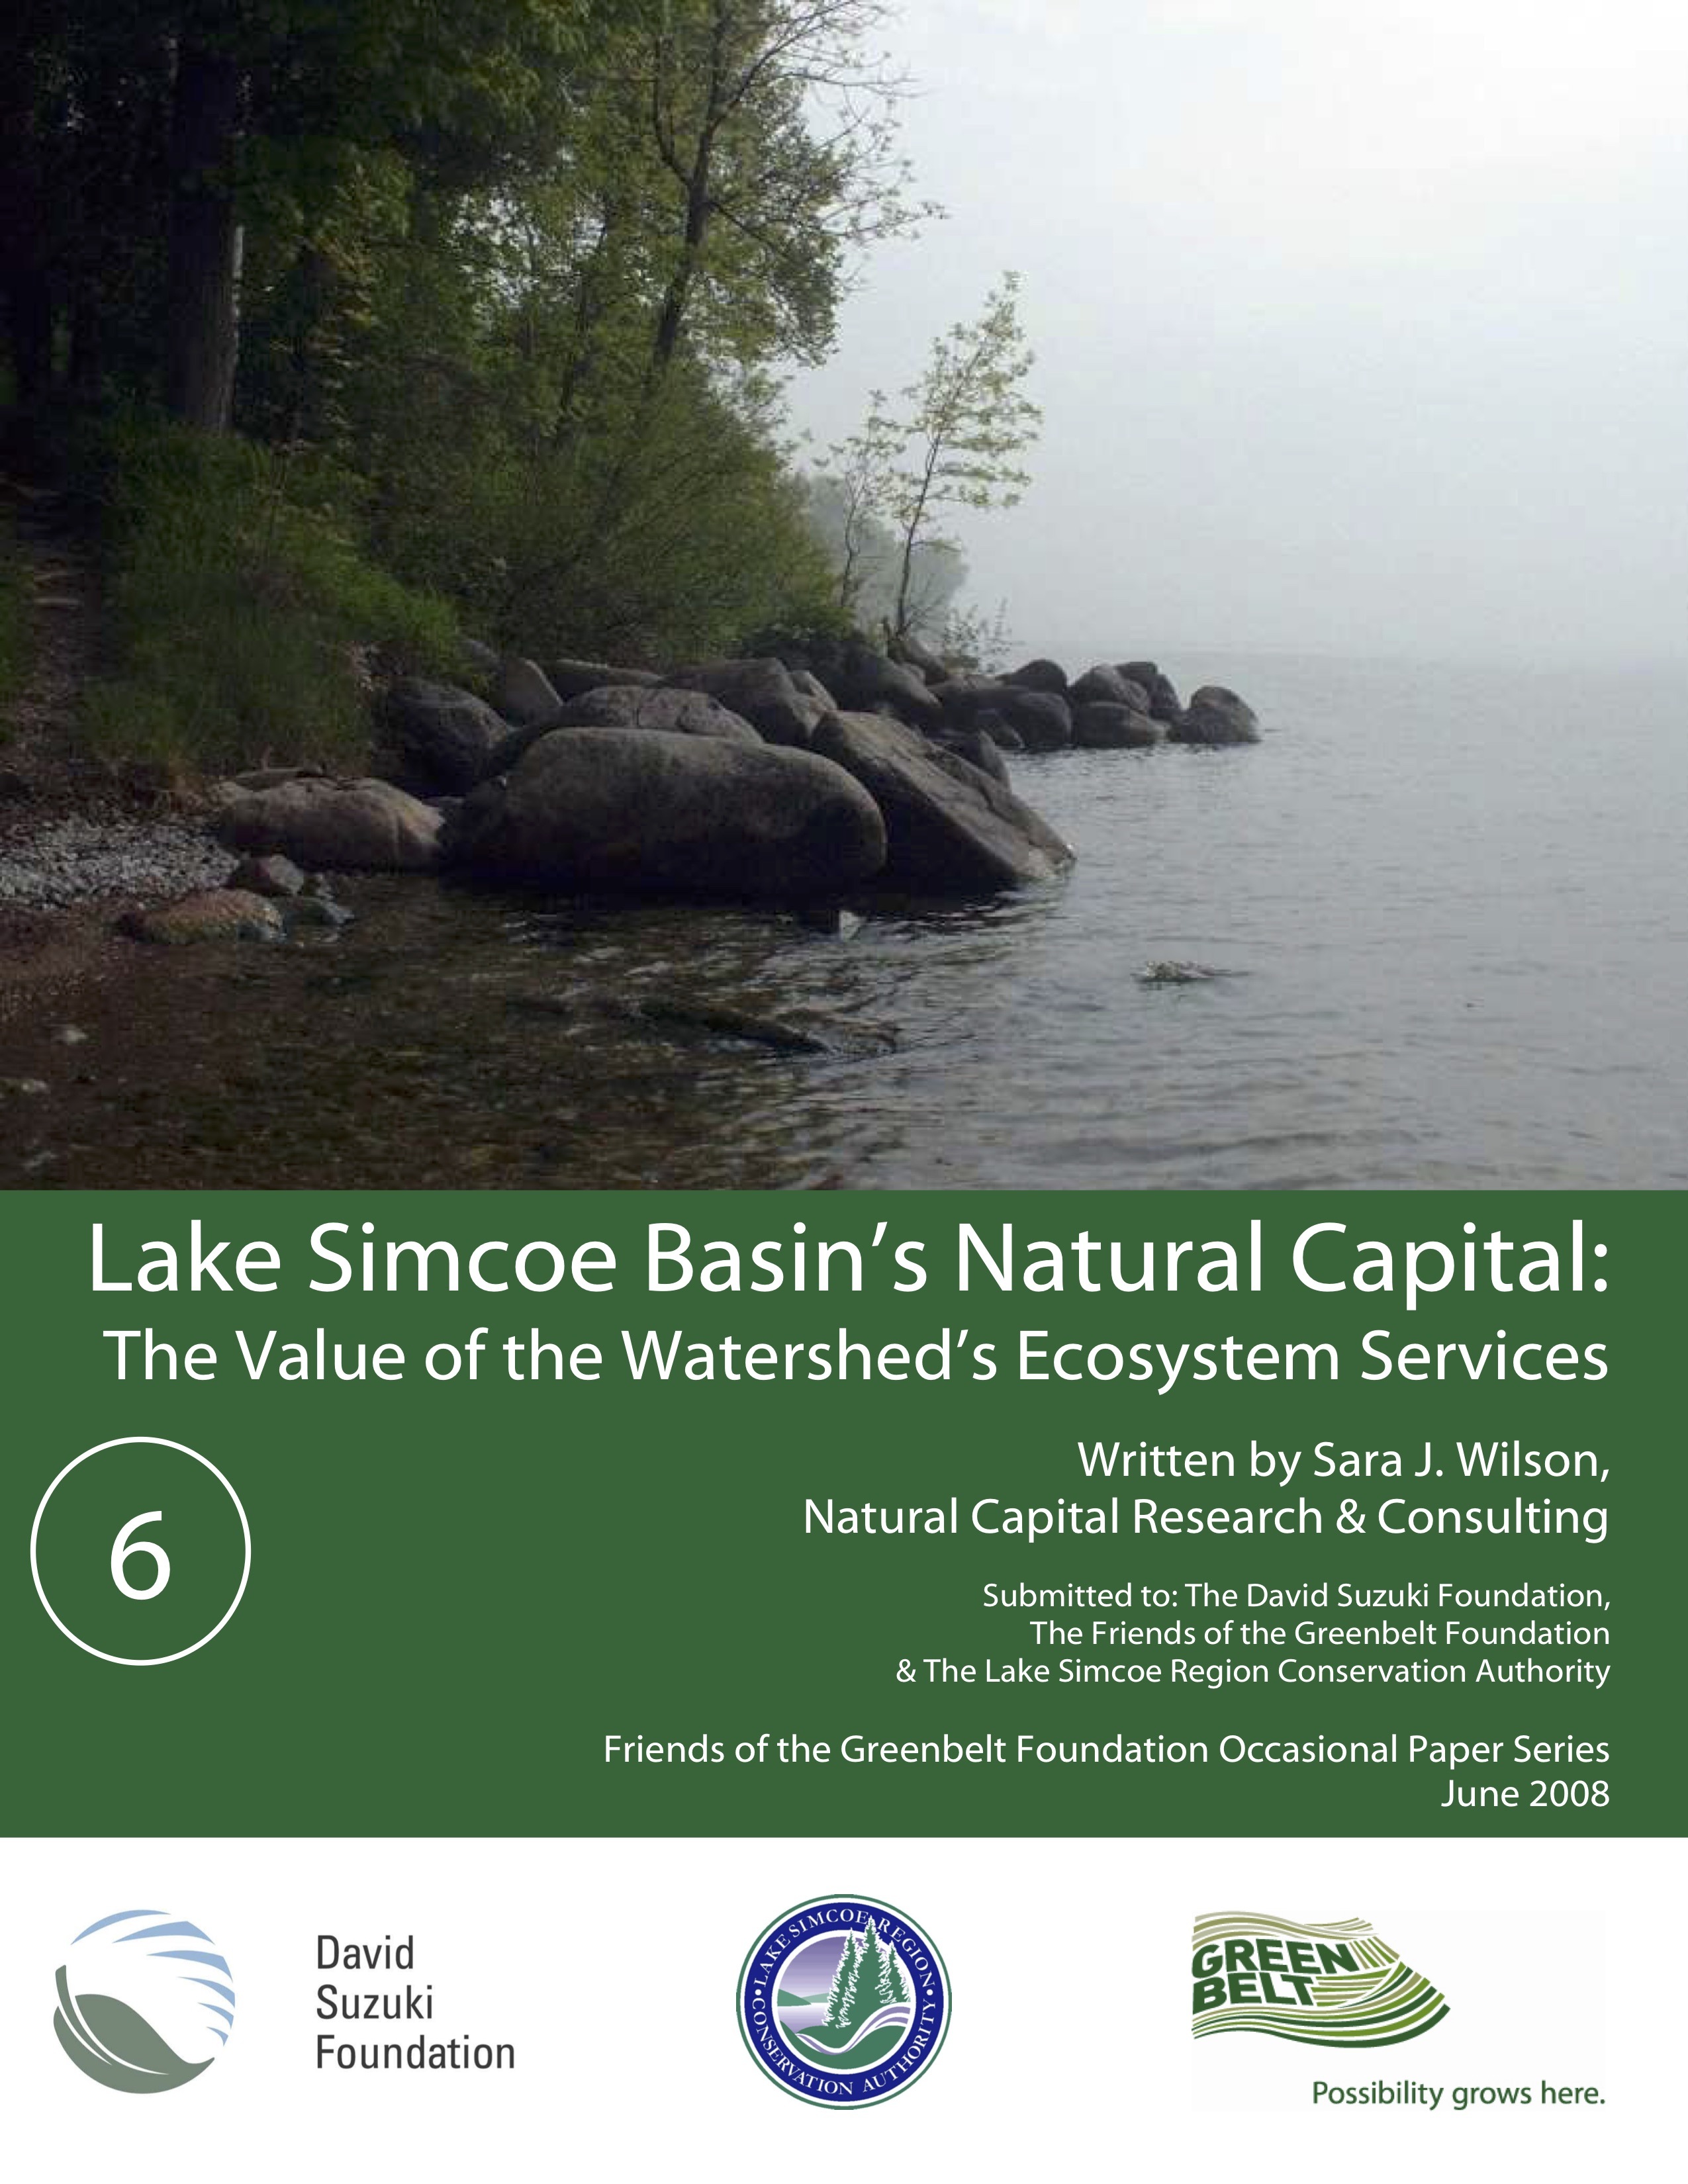 Lake Simcoe Basin's Natural Capital: The Value of the Watershed's Ecosystem Services